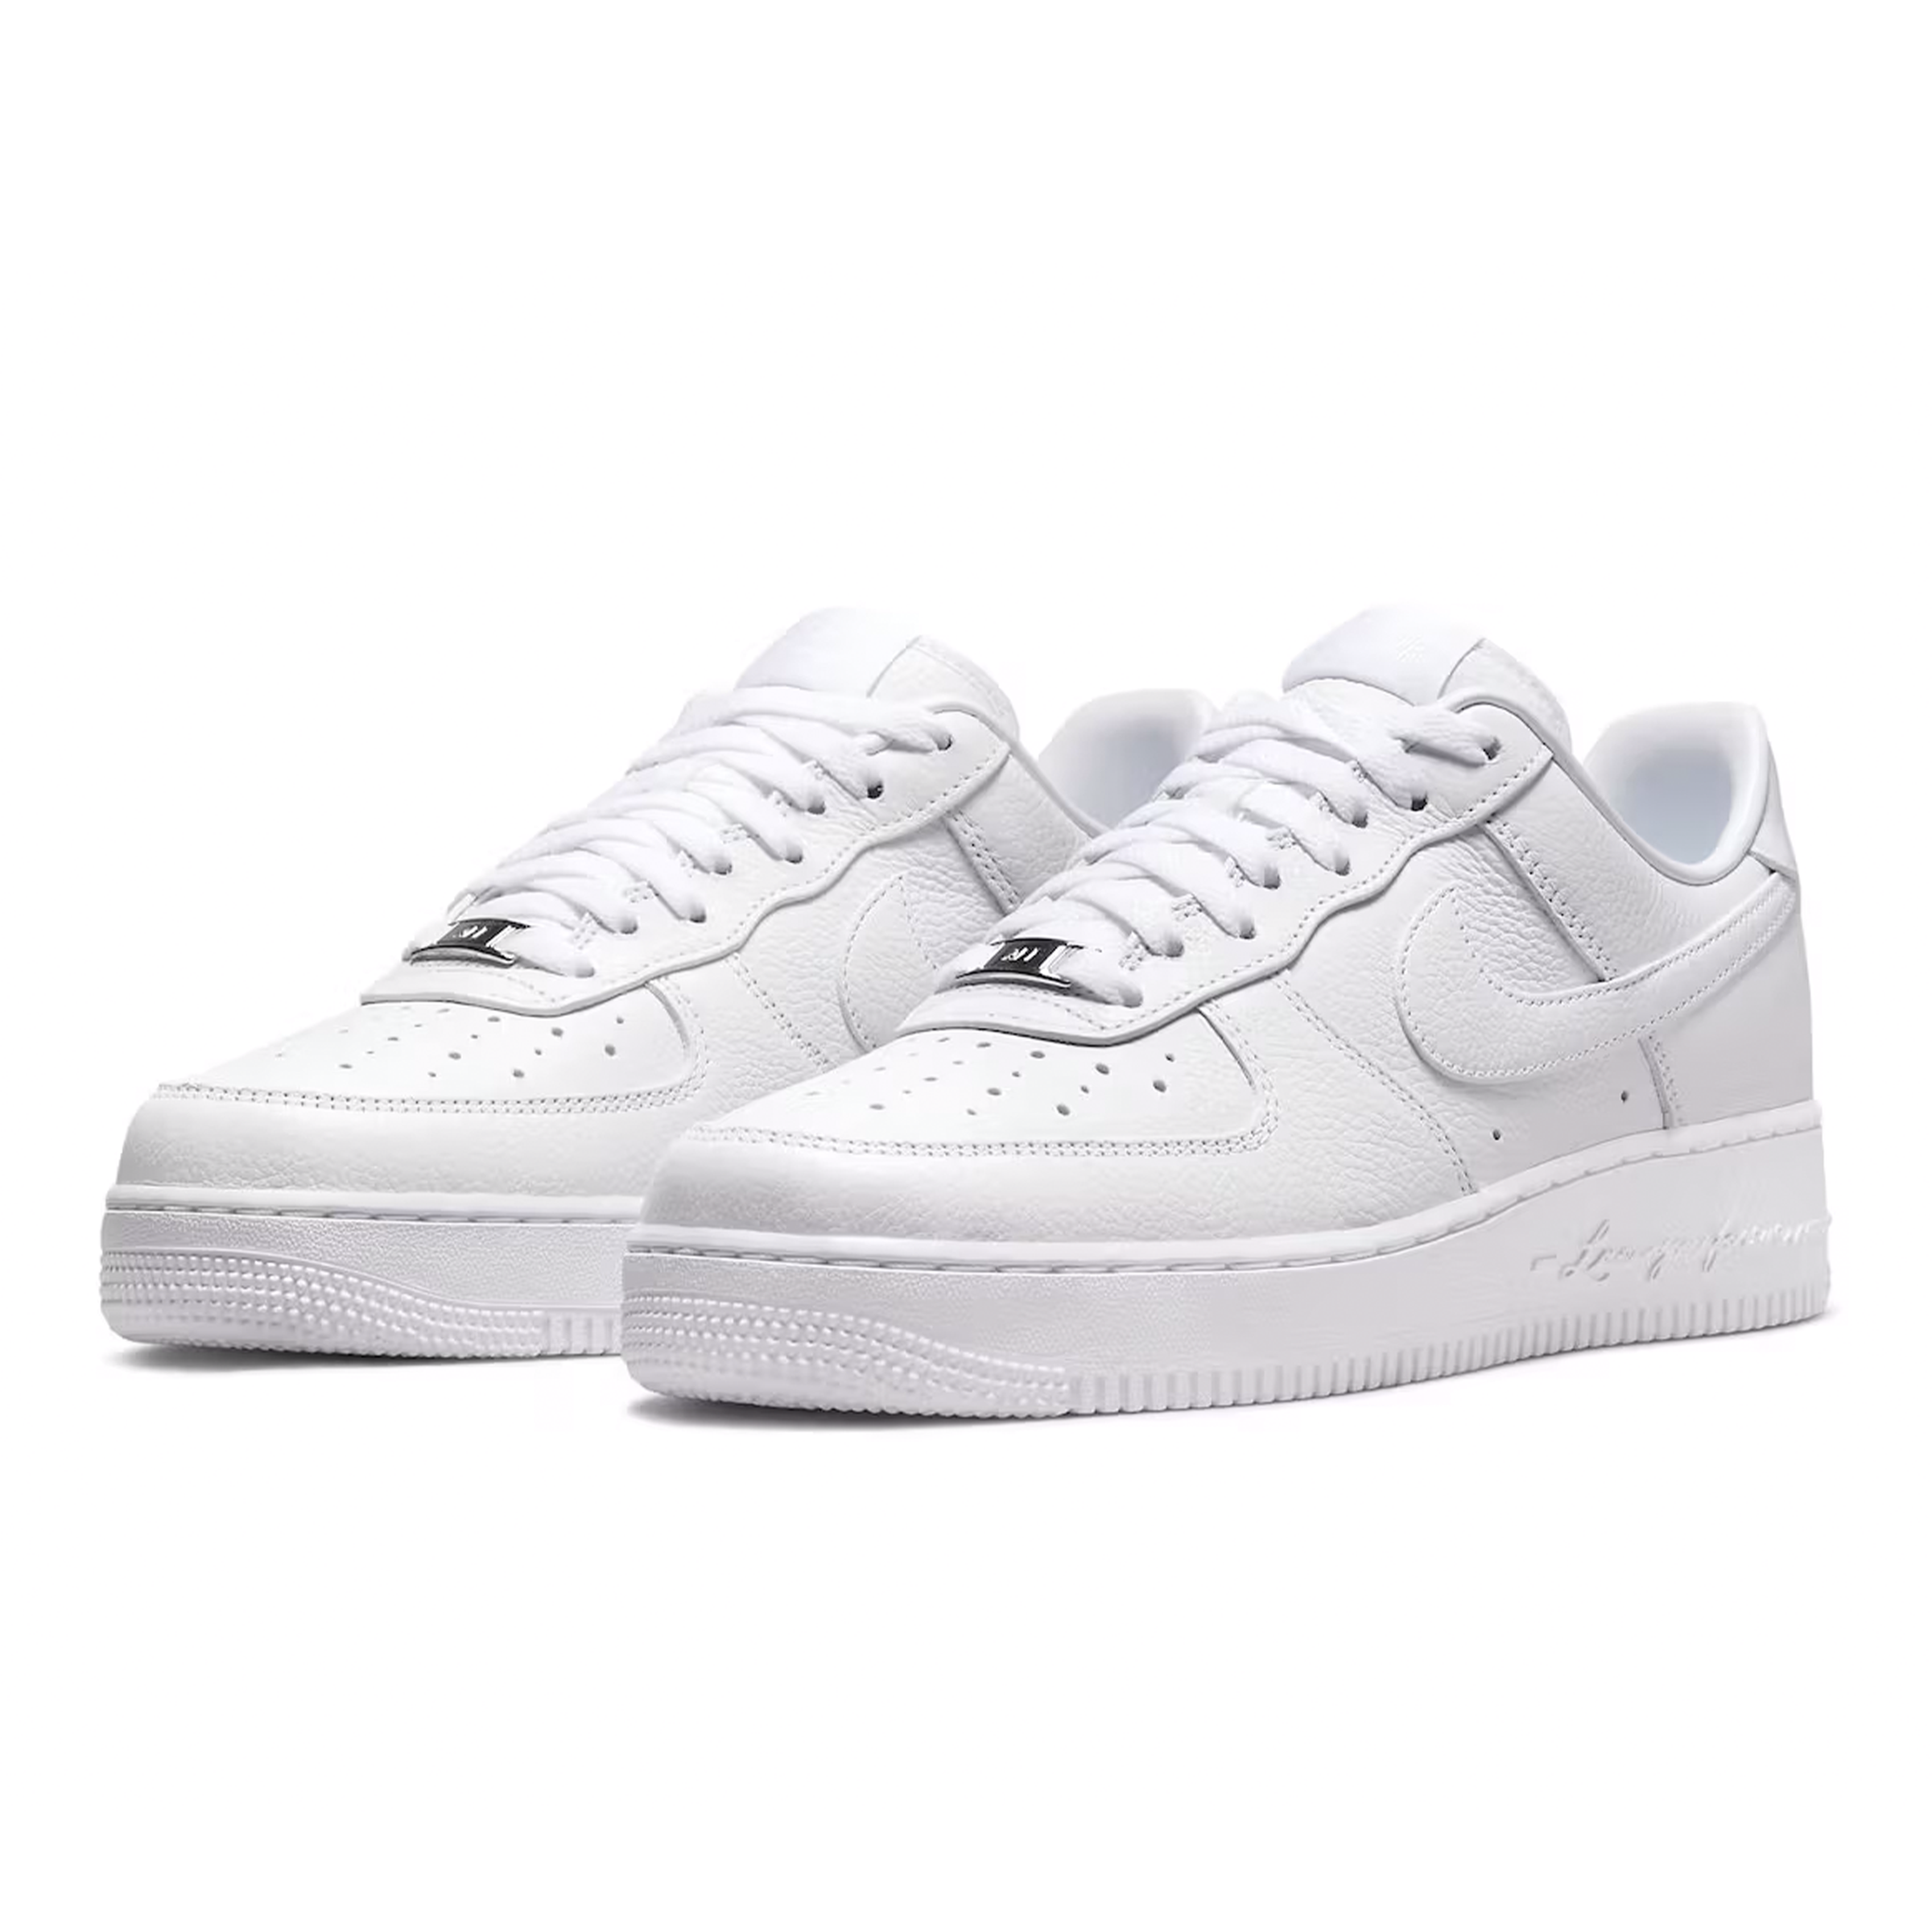 NOCTA x Nike Air Force 1 Low - "Certified Lover Boy"